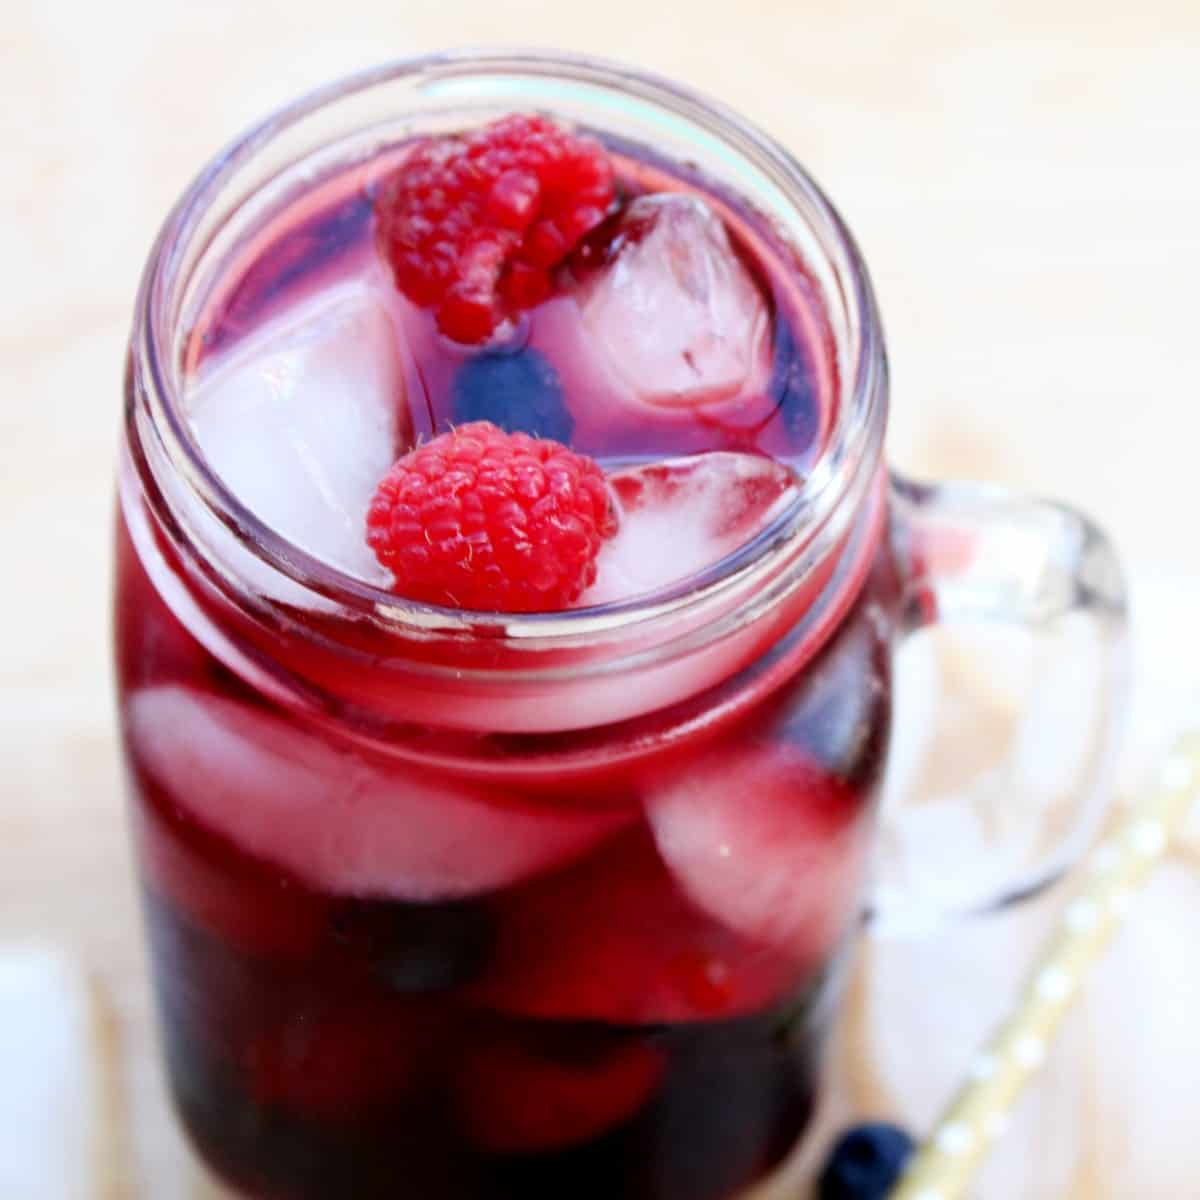 A tilted jar mug is tilted forward with red wine sangria over ice.Raspberries and blueberries are interspersed throughout.